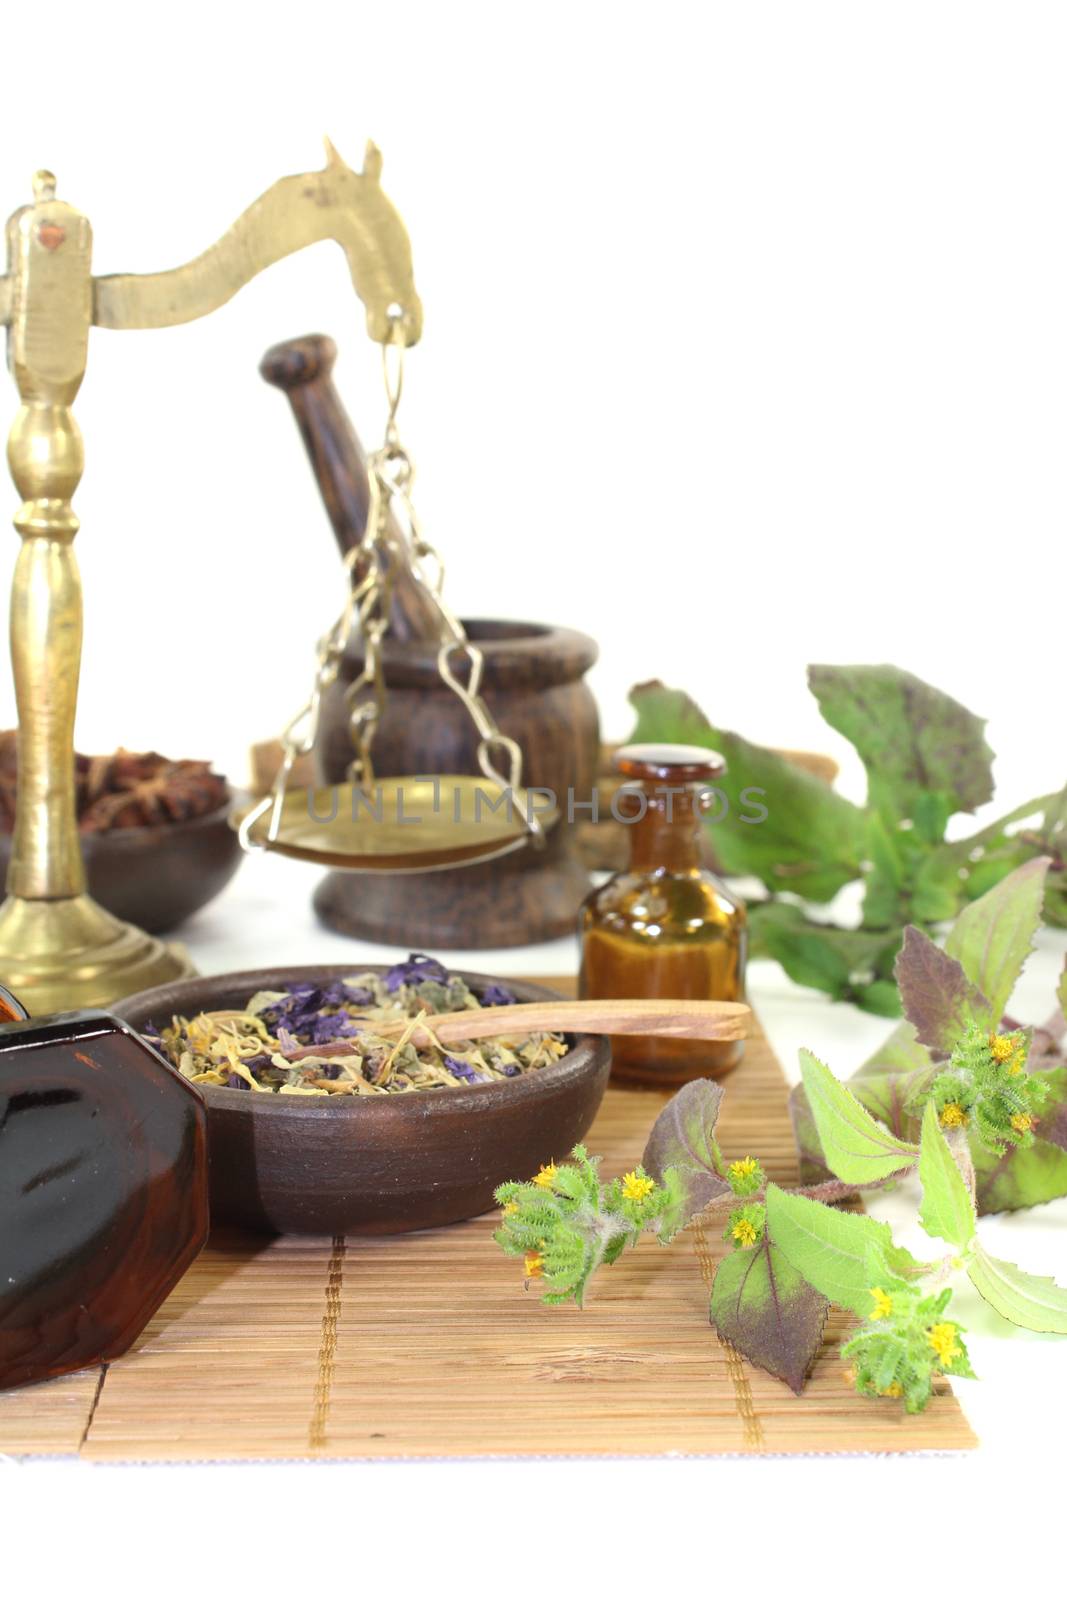 Chinese medicine with plants by discovery